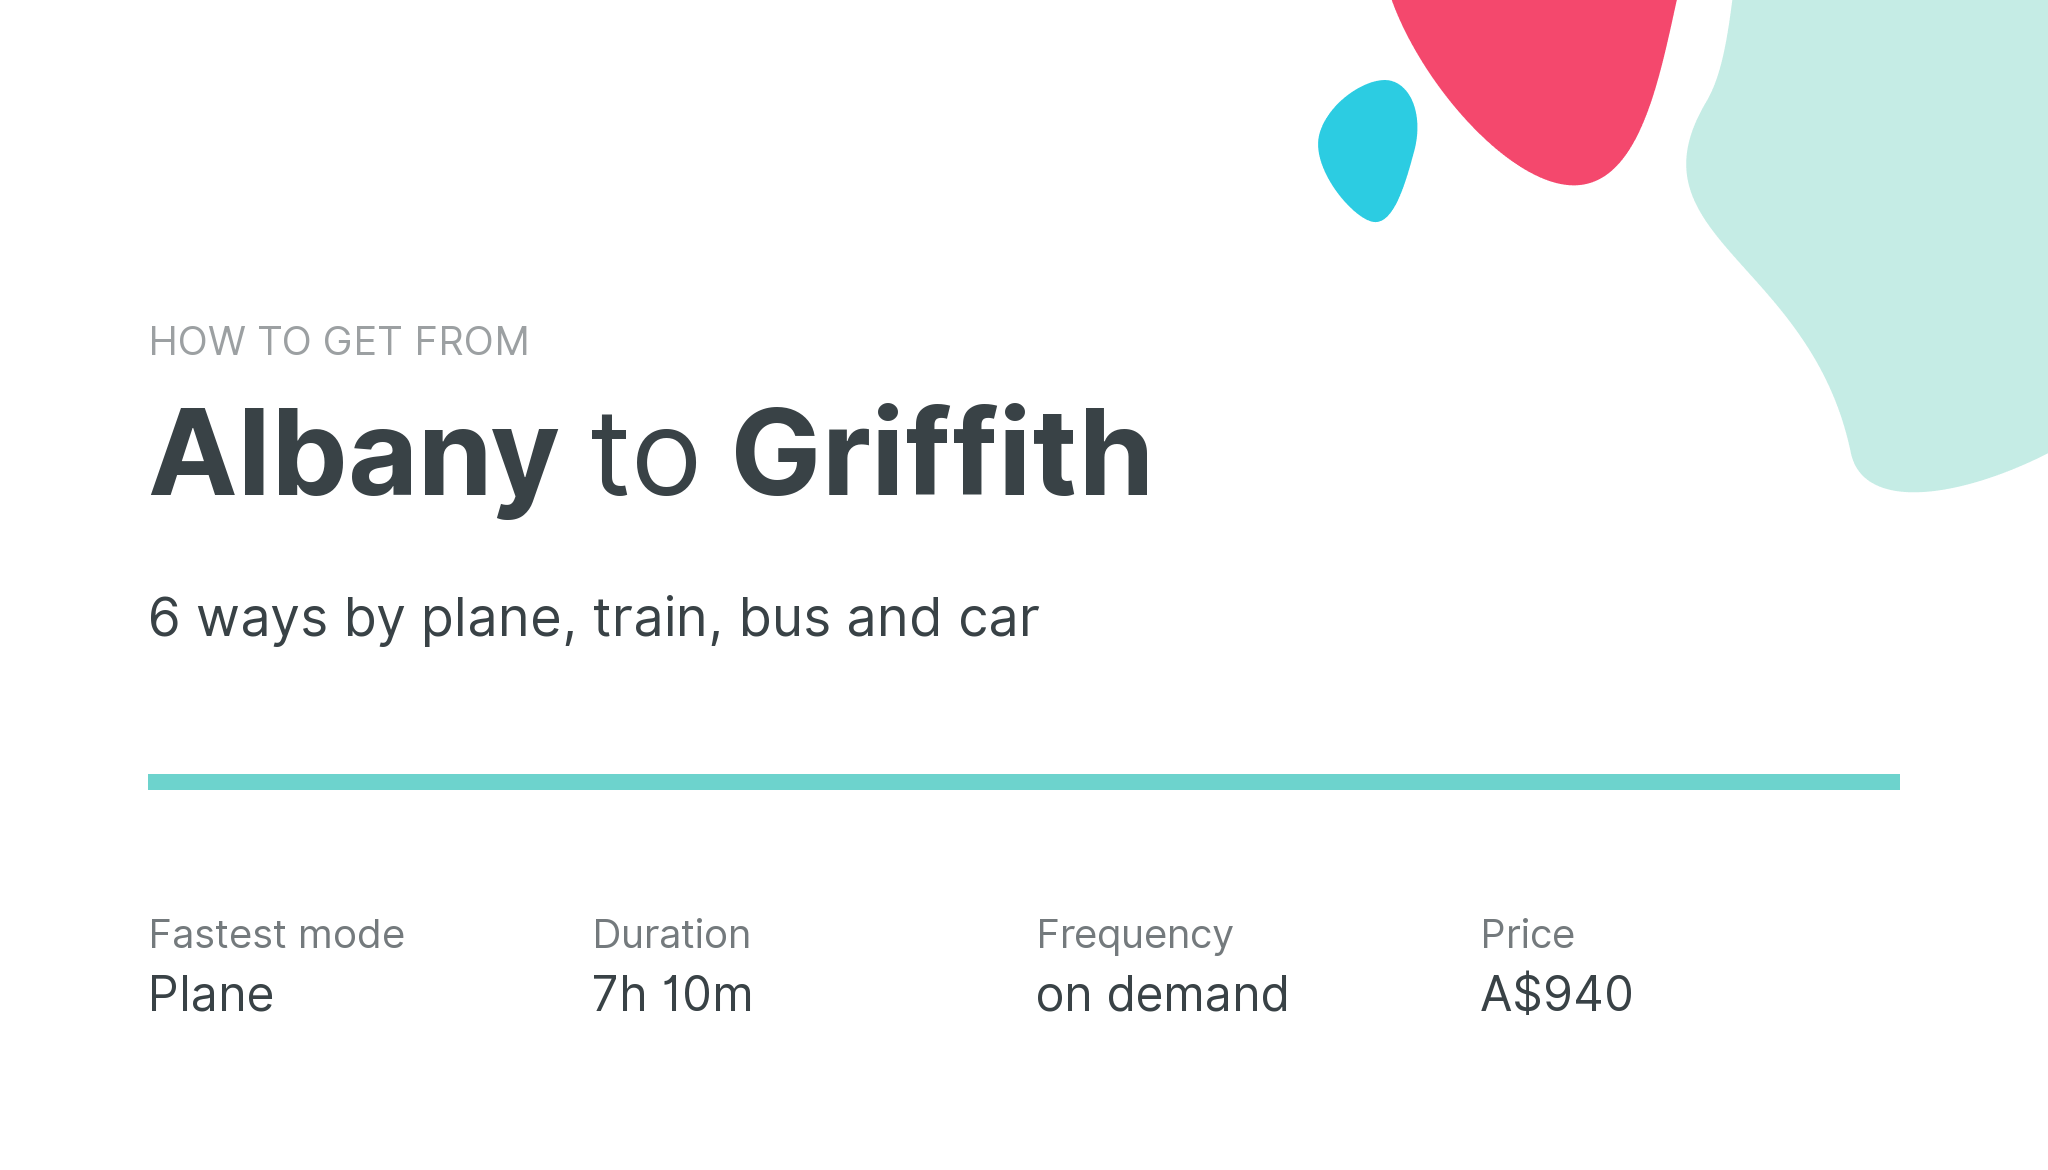 How do I get from Albany to Griffith